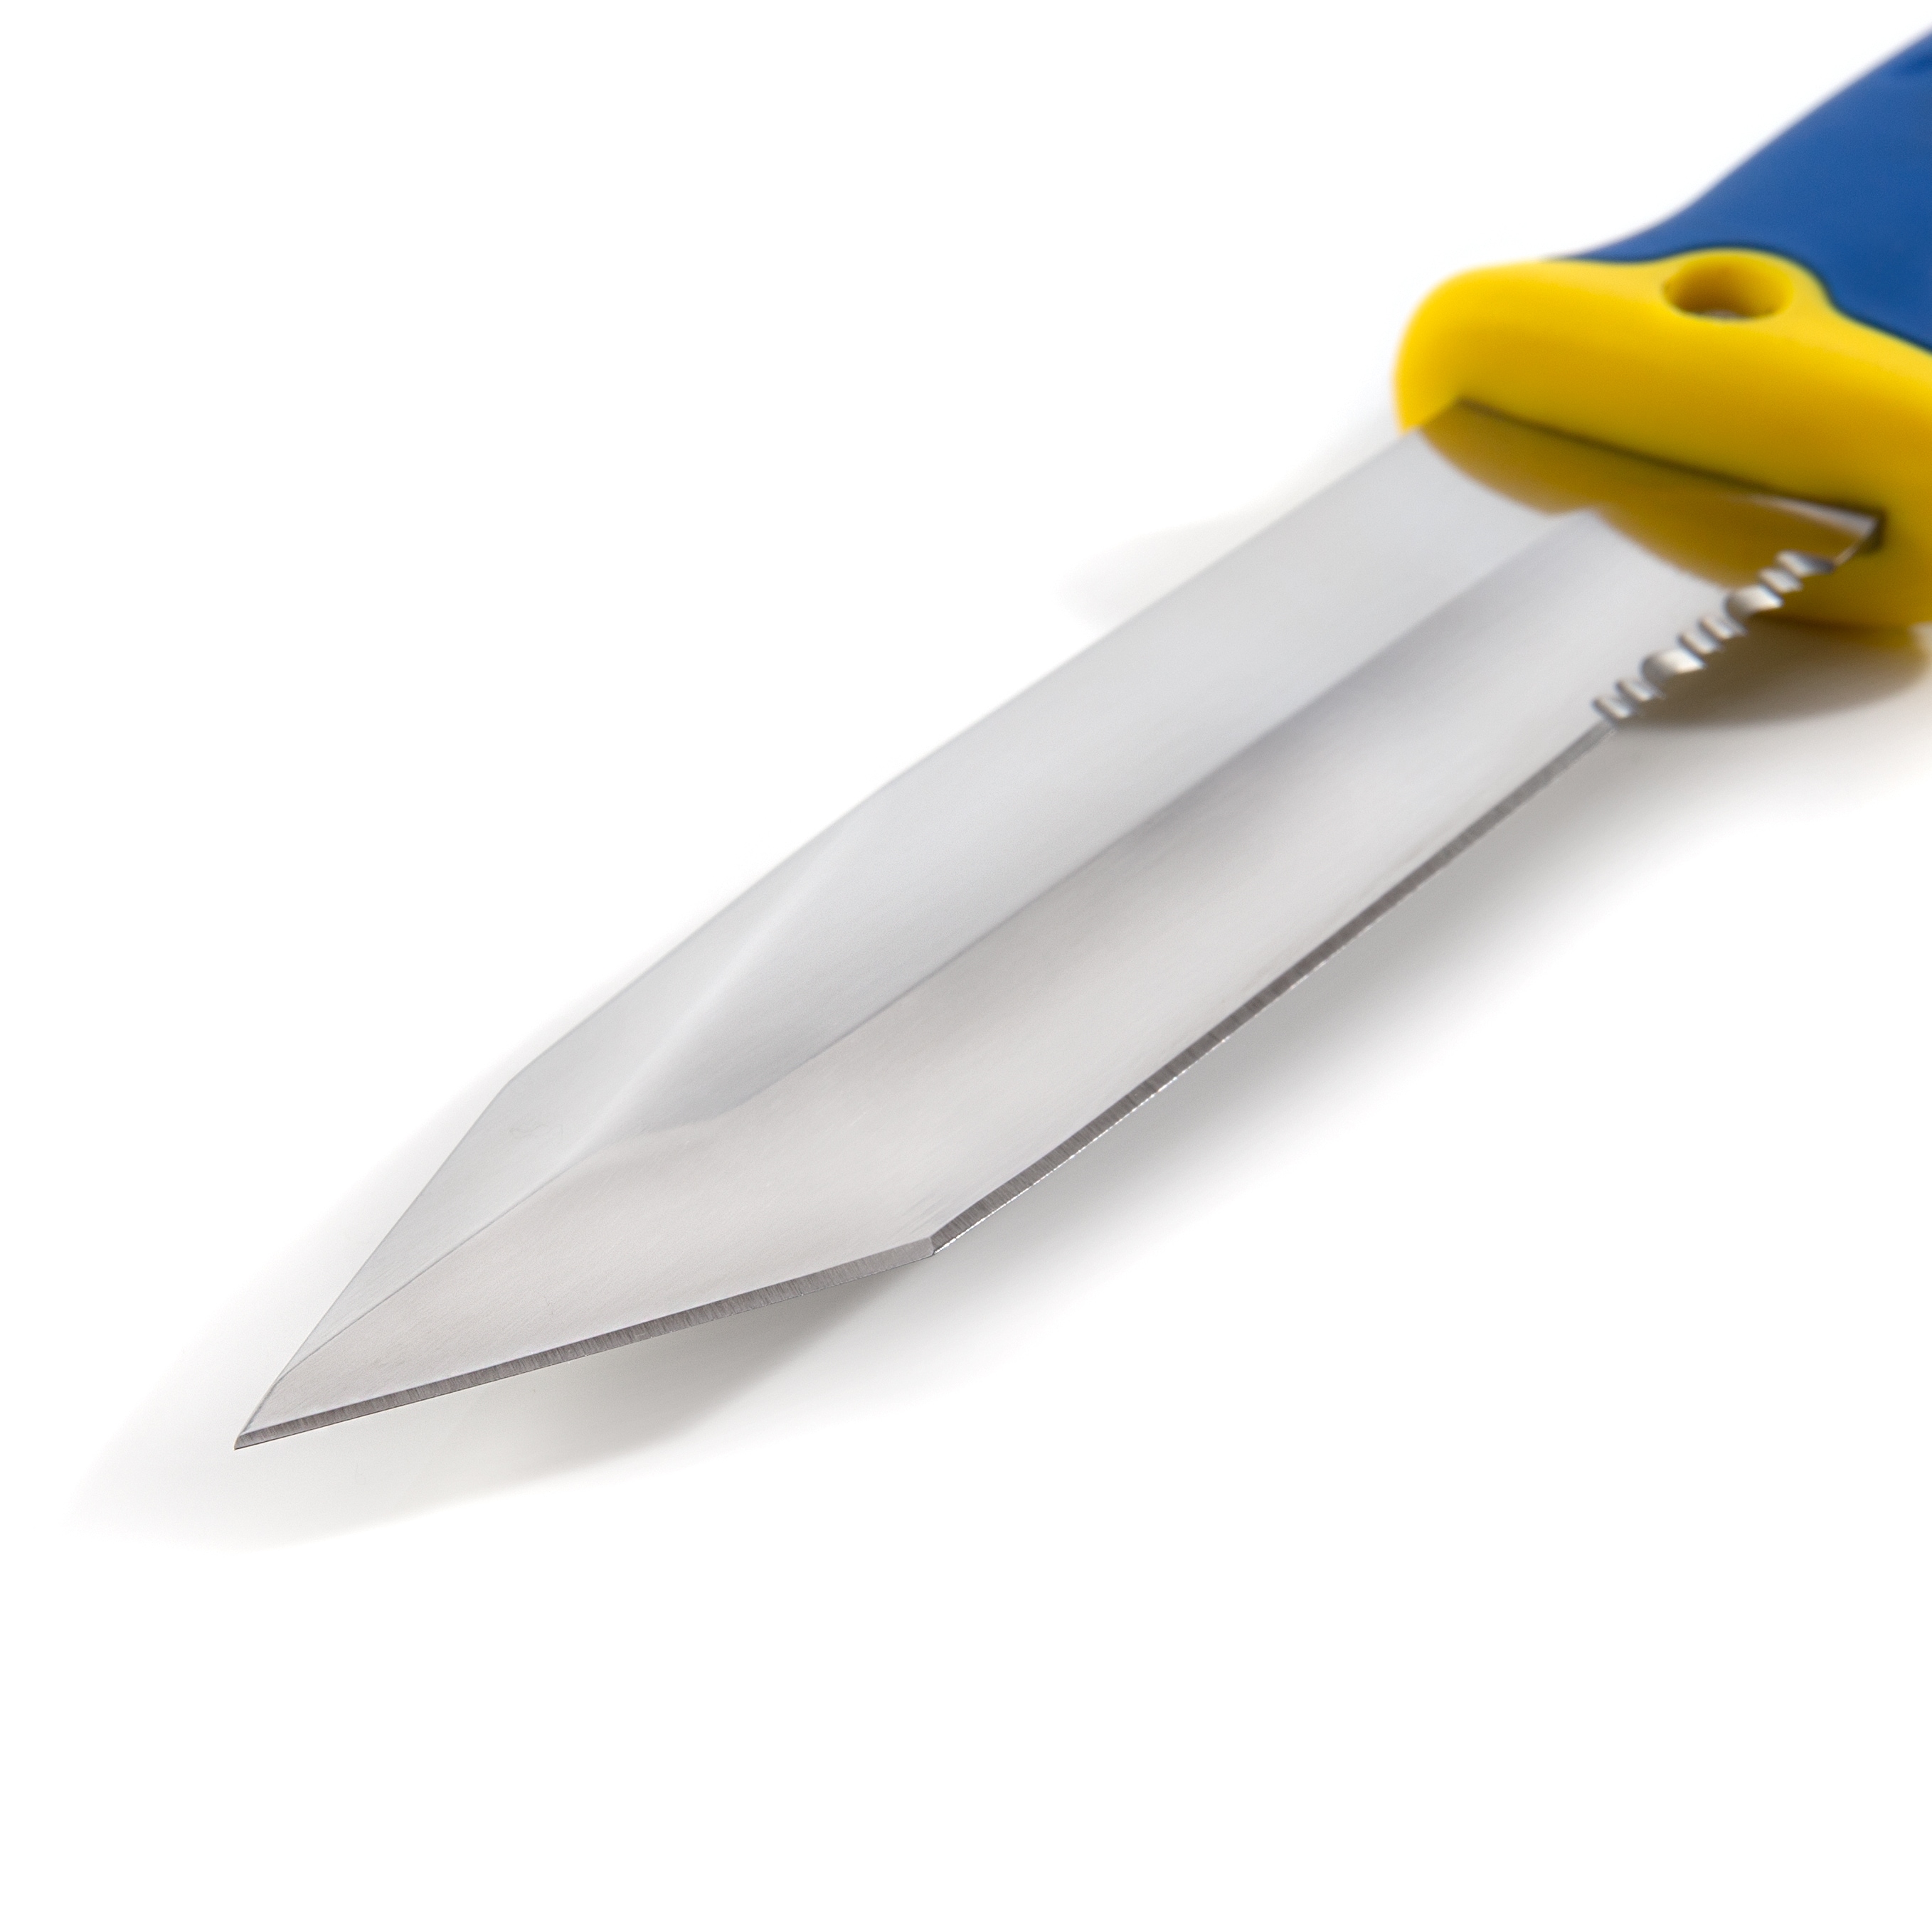 Xflip 316 Stainless Steel Utility Knife, Hobby Knife Fits Xacto Knife Blades.  Made in the USA 